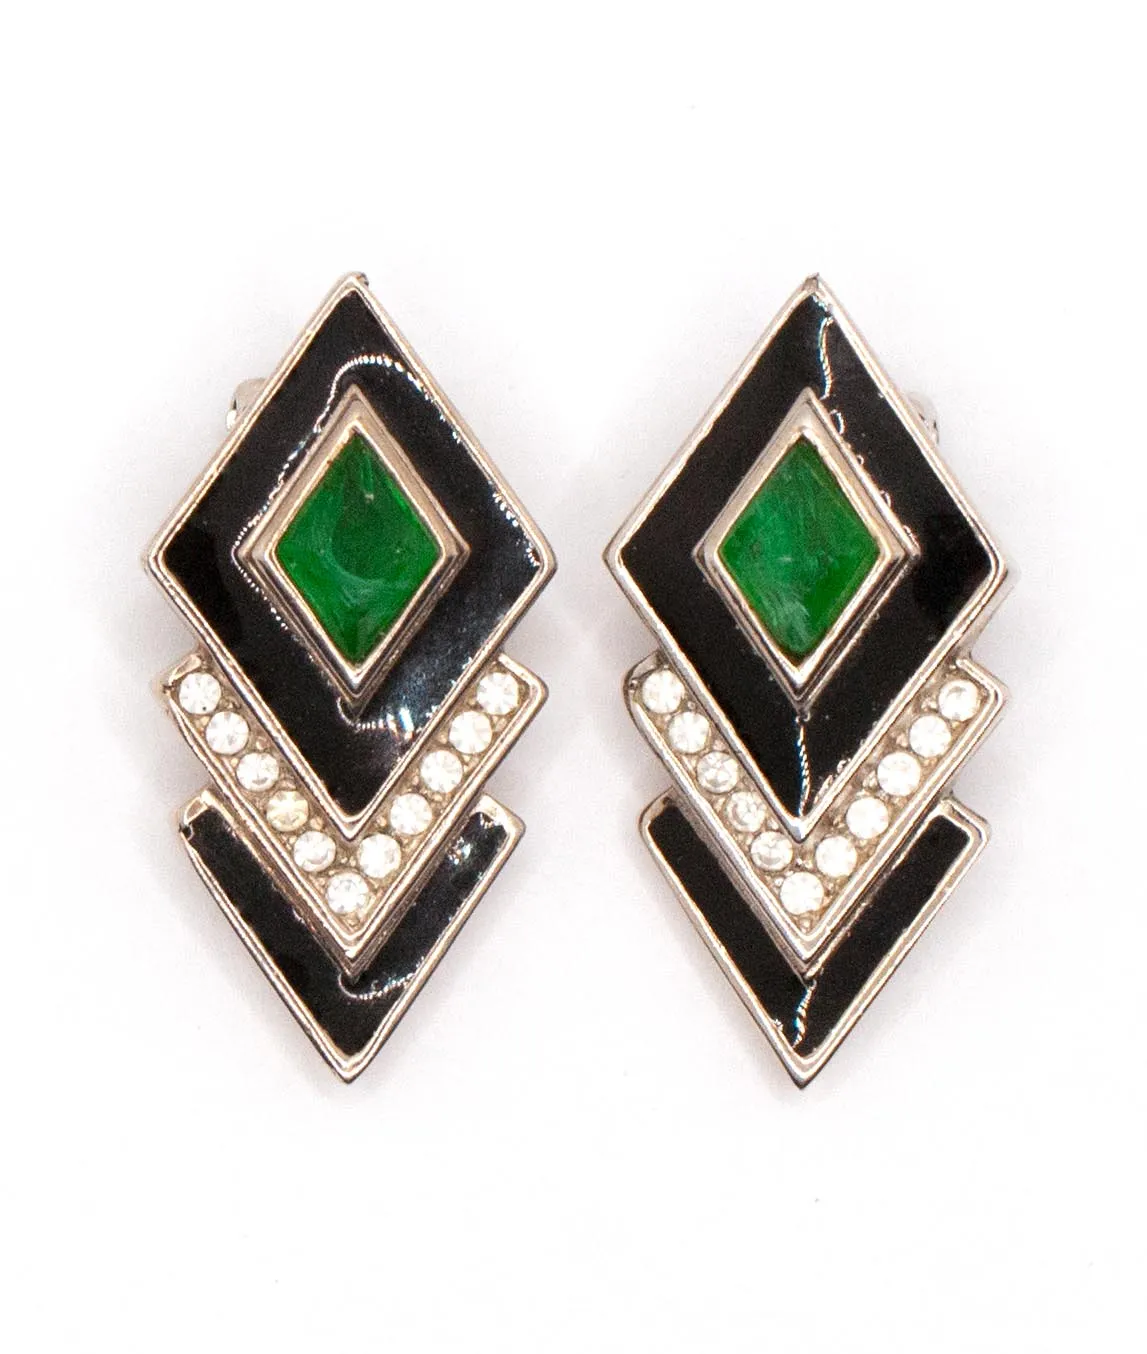 Black and green earrings in an art deco geometric style with rhinestones by Christian Dior